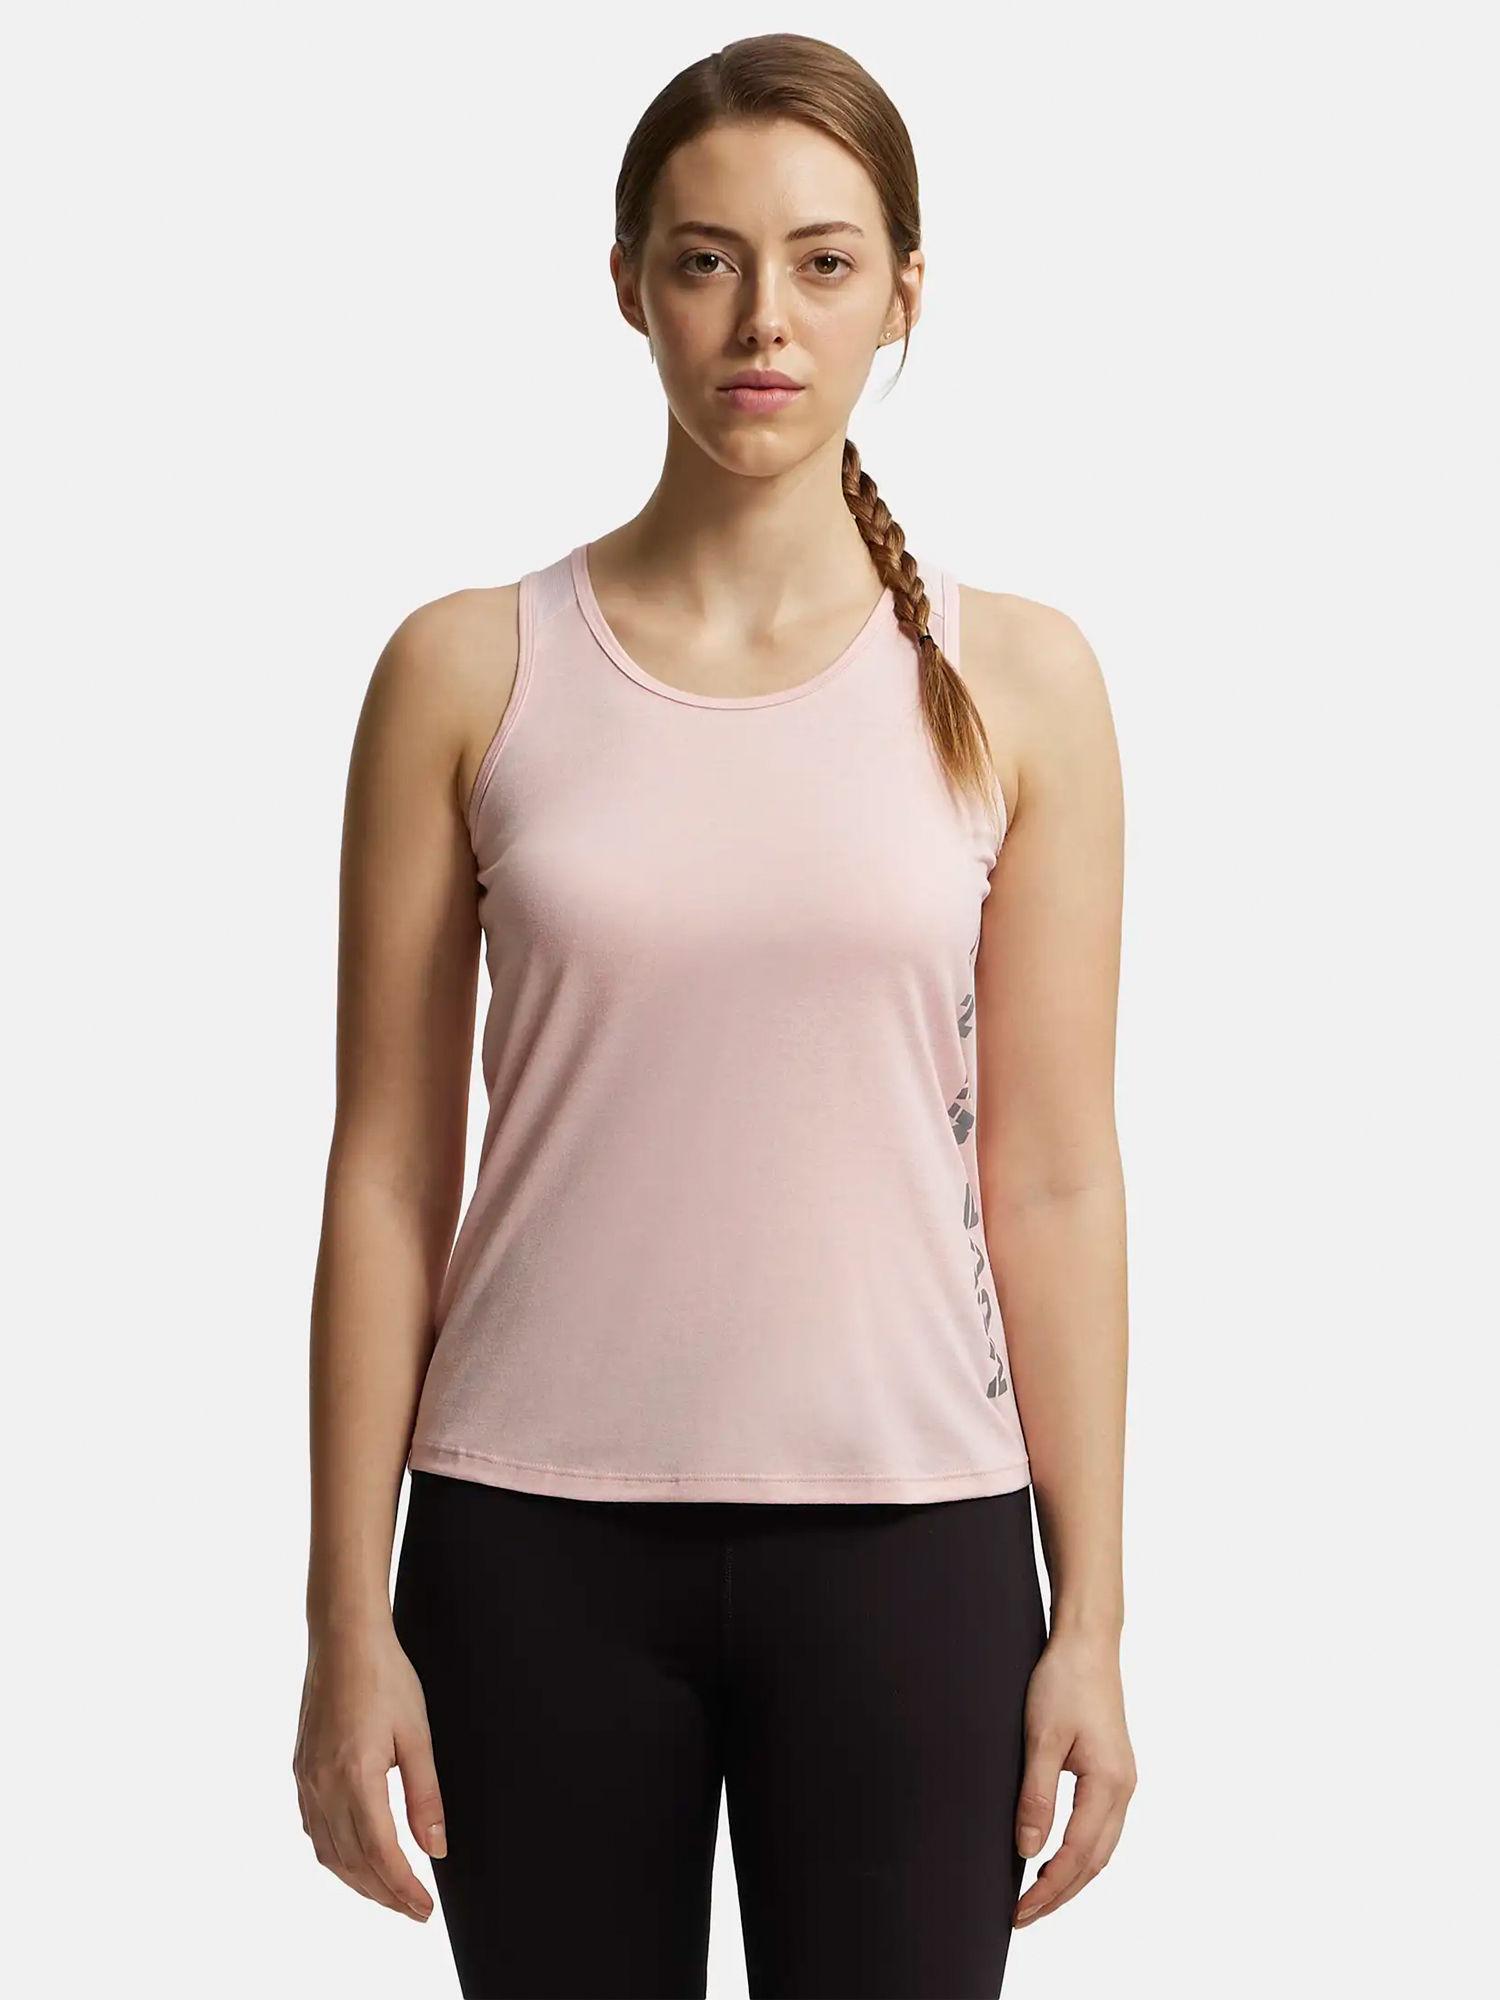 mw33 women's microfiber performance tank top with stay dry treatment -light pink pink